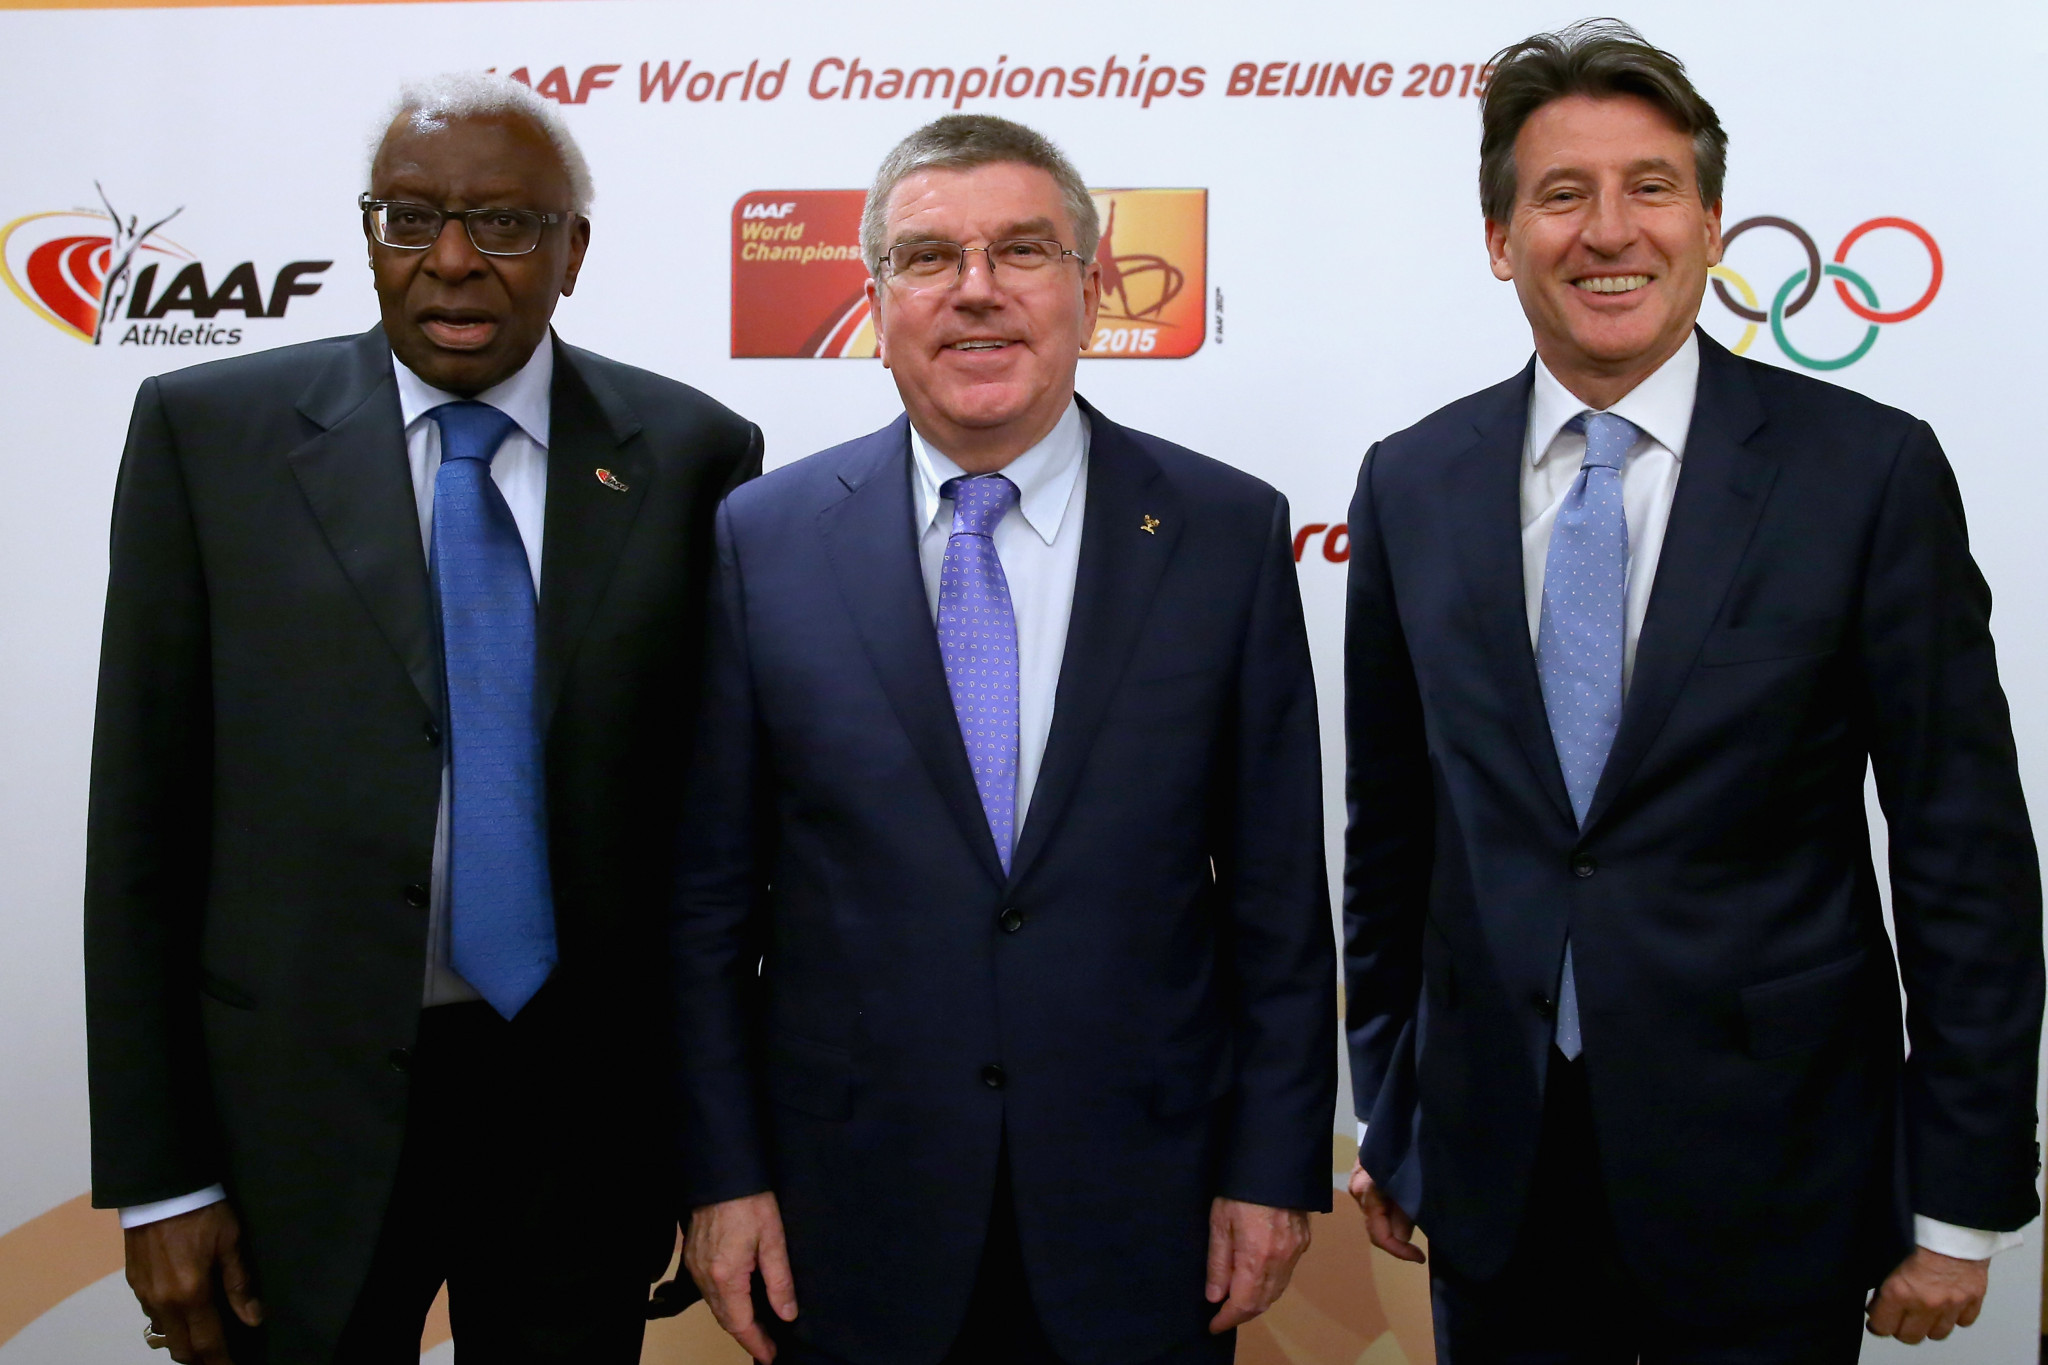 The example of the IAAF under Lamine Diack, left, was used to highlight sporting governance problems. His successor Sebastian Coe, right, attended the Olympic Summit chaired by Thomas Bach ©Getty Images